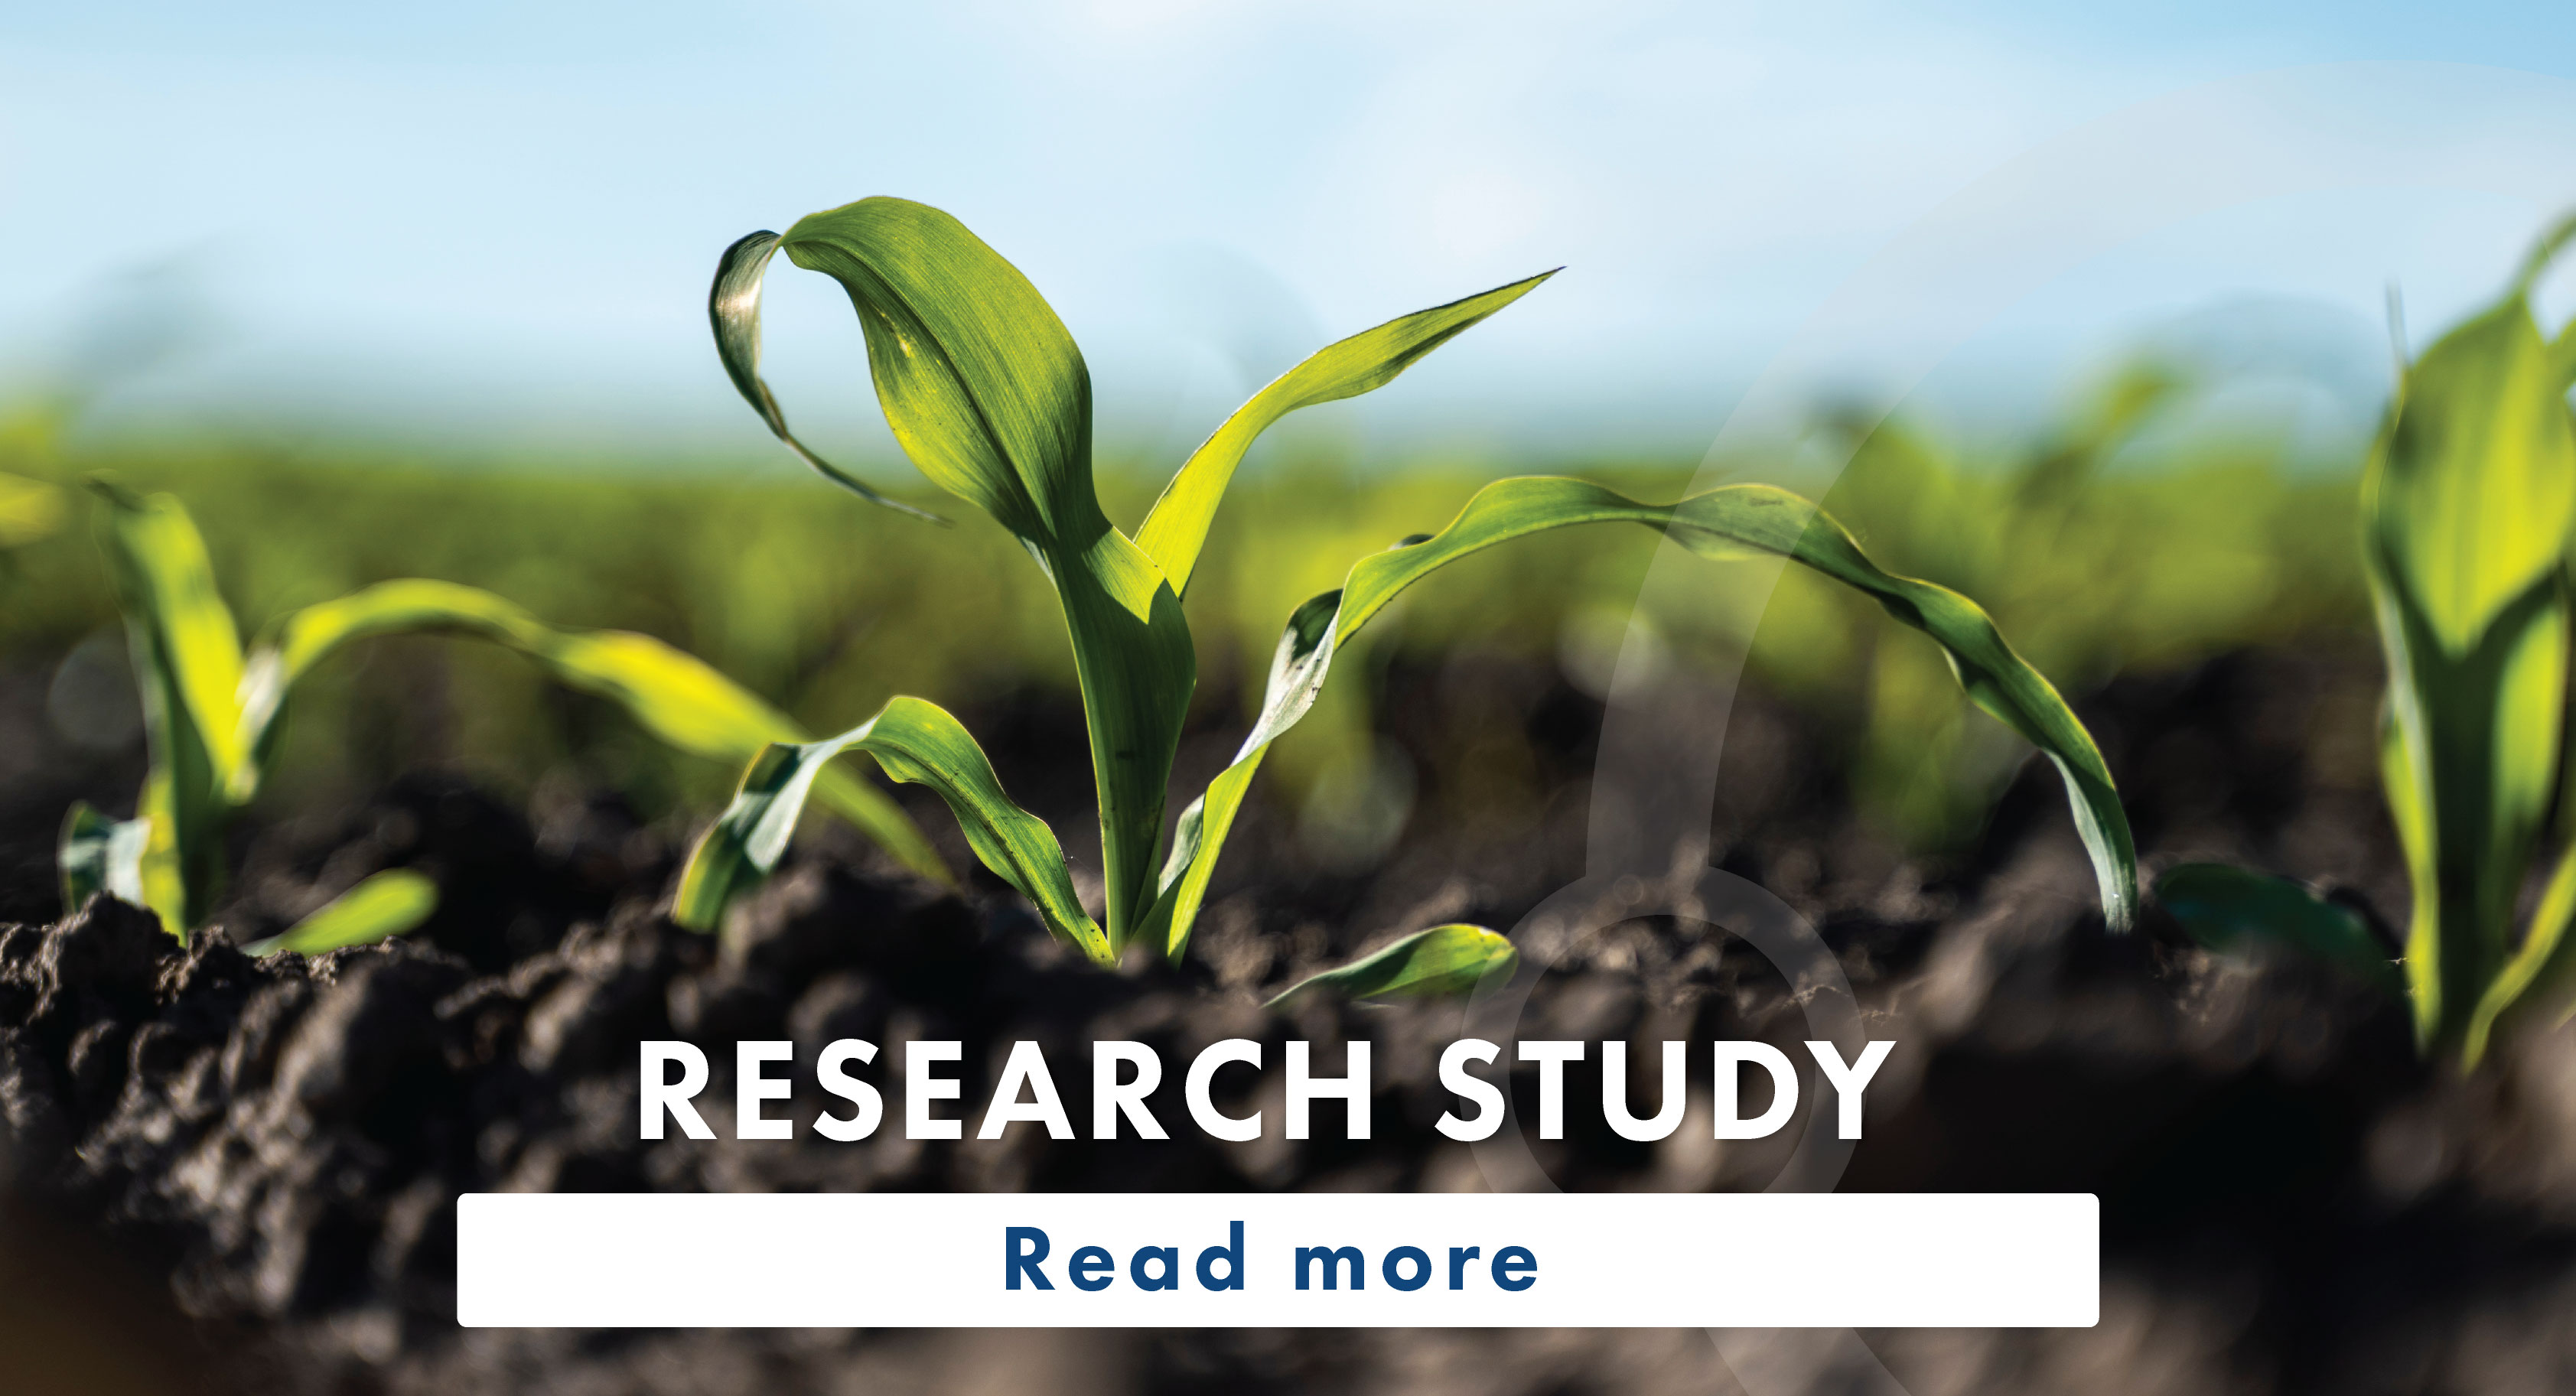 Image of a young corn plant growing in soil - text that says Corn research study - read more